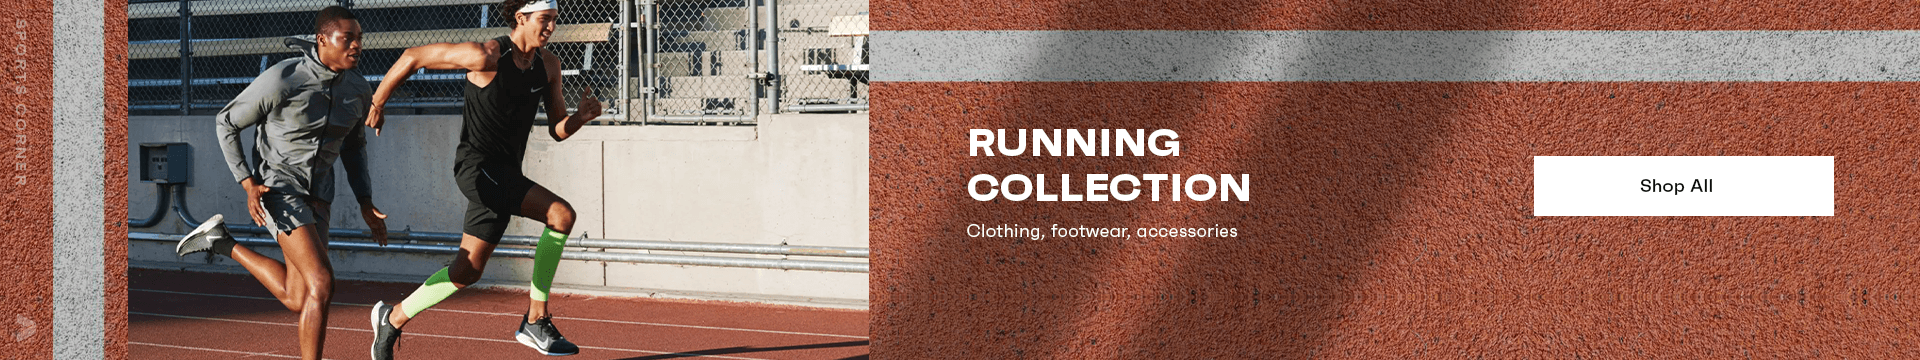 Running Collection